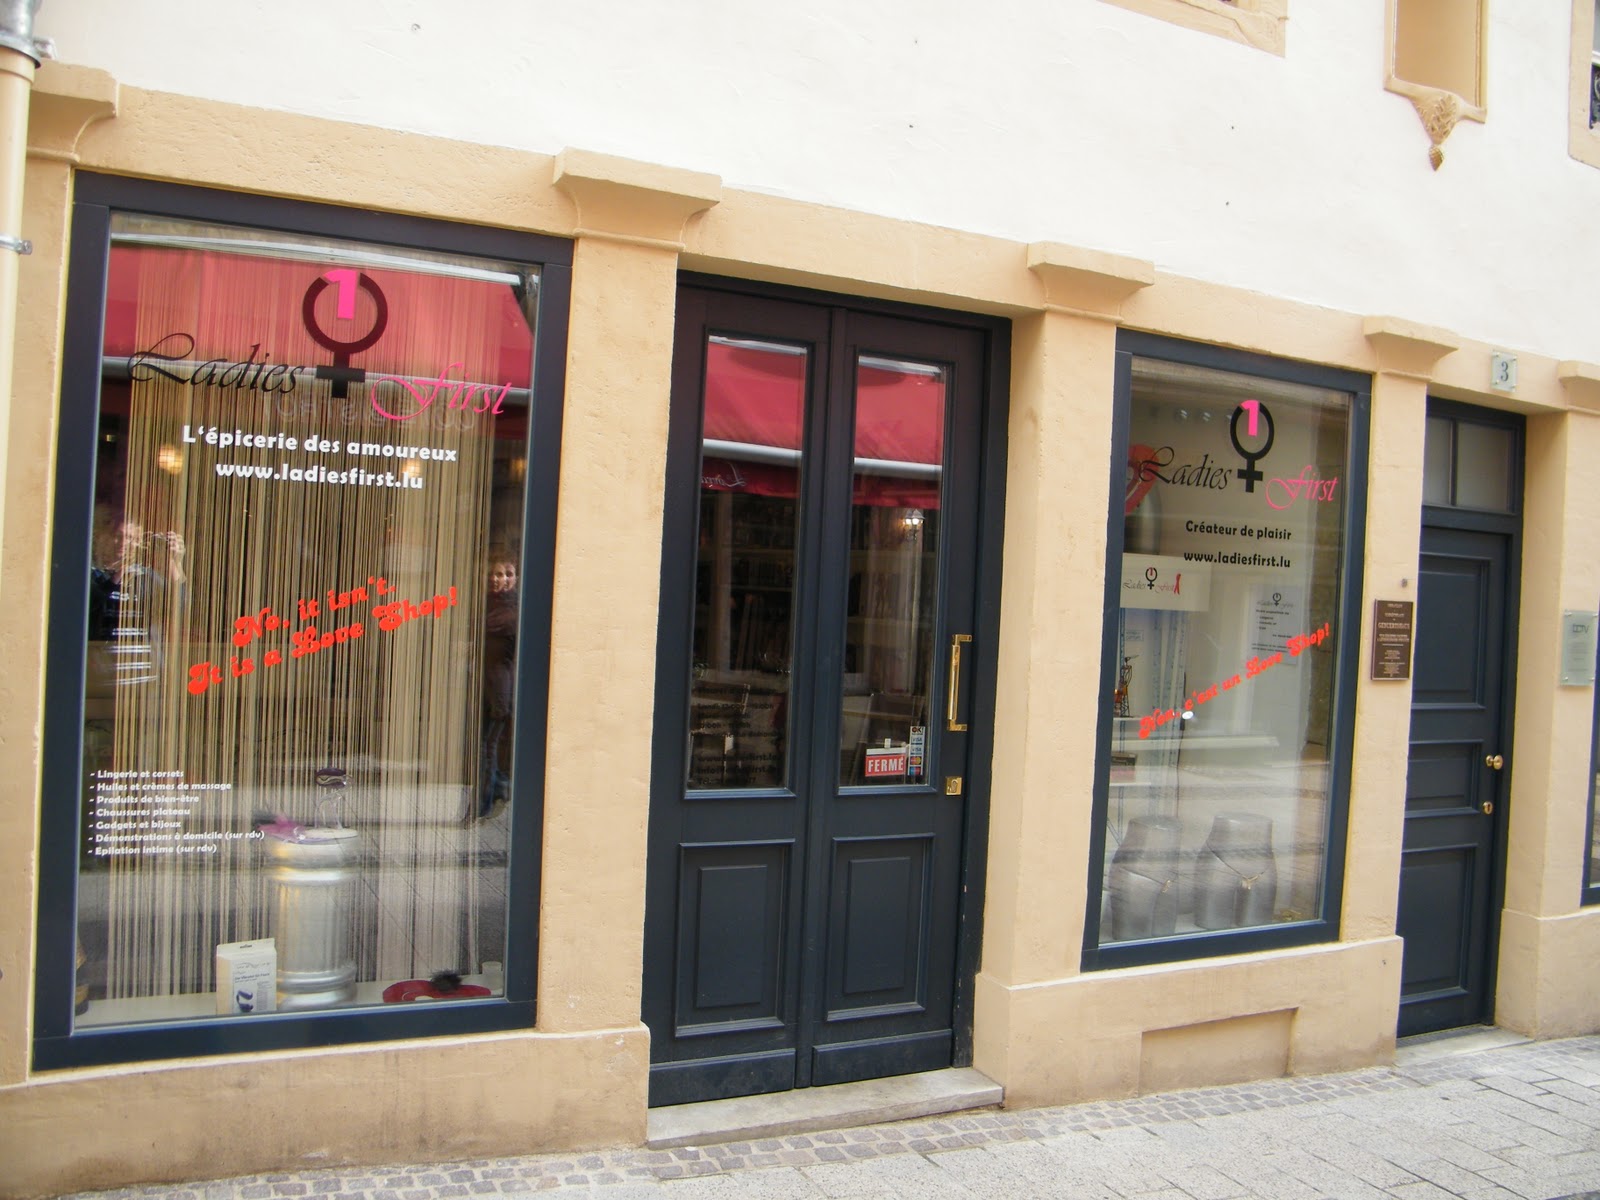 Another sex shop in Luxembourg - Ladies First | Life in Luxembourg